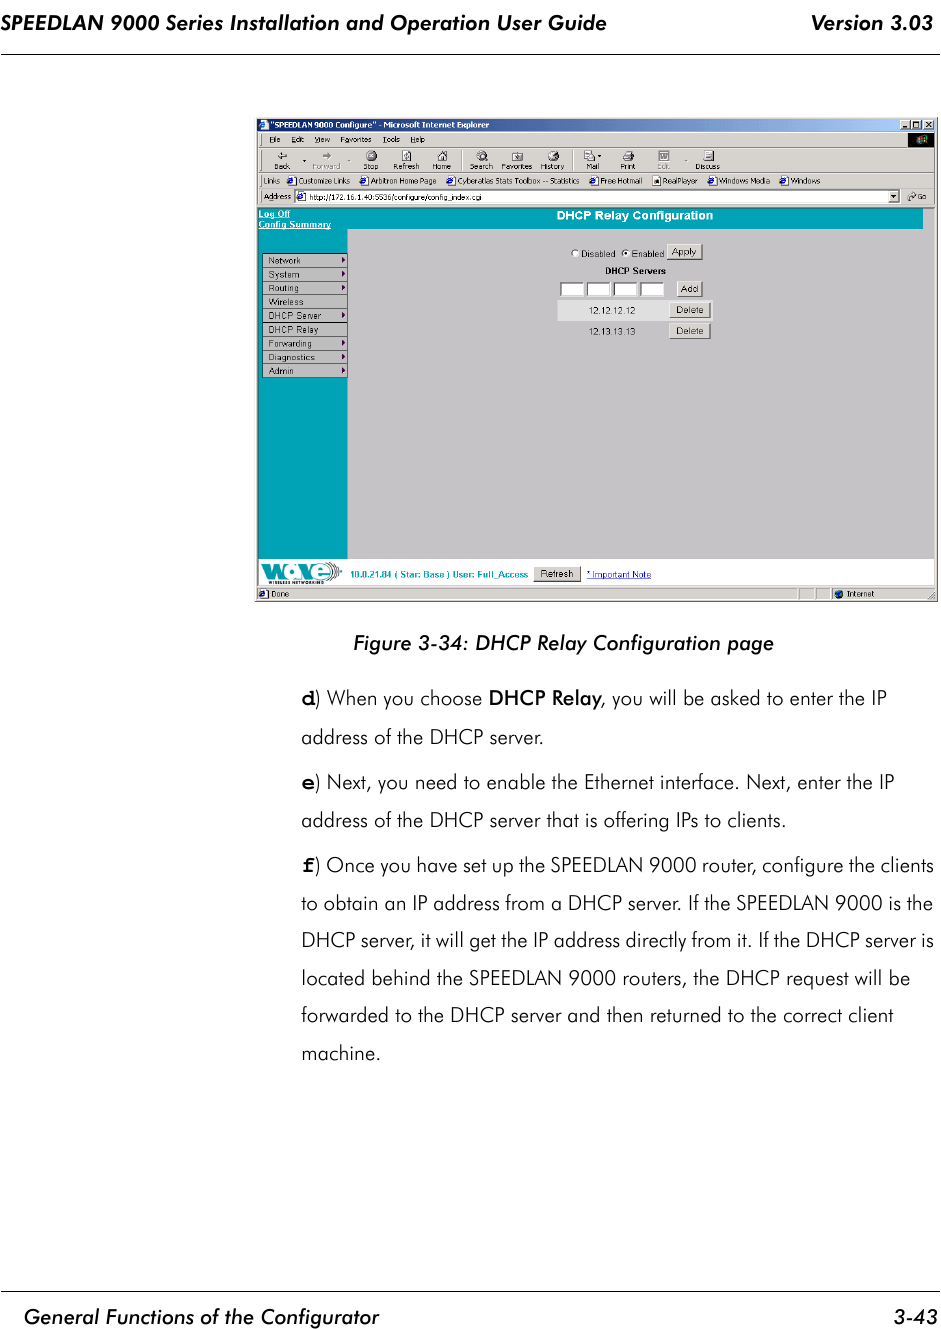 SPEEDLAN 9000 Series Installation and Operation User Guide                                 Version 3.03     General Functions of the Configurator 3-43                                                                                                                                                              Figure 3-34: DHCP Relay Configuration paged) When you choose DHCP Relay, you will be asked to enter the IP address of the DHCP server.   e) Next, you need to enable the Ethernet interface. Next, enter the IP address of the DHCP server that is offering IPs to clients.    f) Once you have set up the SPEEDLAN 9000 router, configure the clients to obtain an IP address from a DHCP server. If the SPEEDLAN 9000 is the DHCP server, it will get the IP address directly from it. If the DHCP server is located behind the SPEEDLAN 9000 routers, the DHCP request will be forwarded to the DHCP server and then returned to the correct client machine.